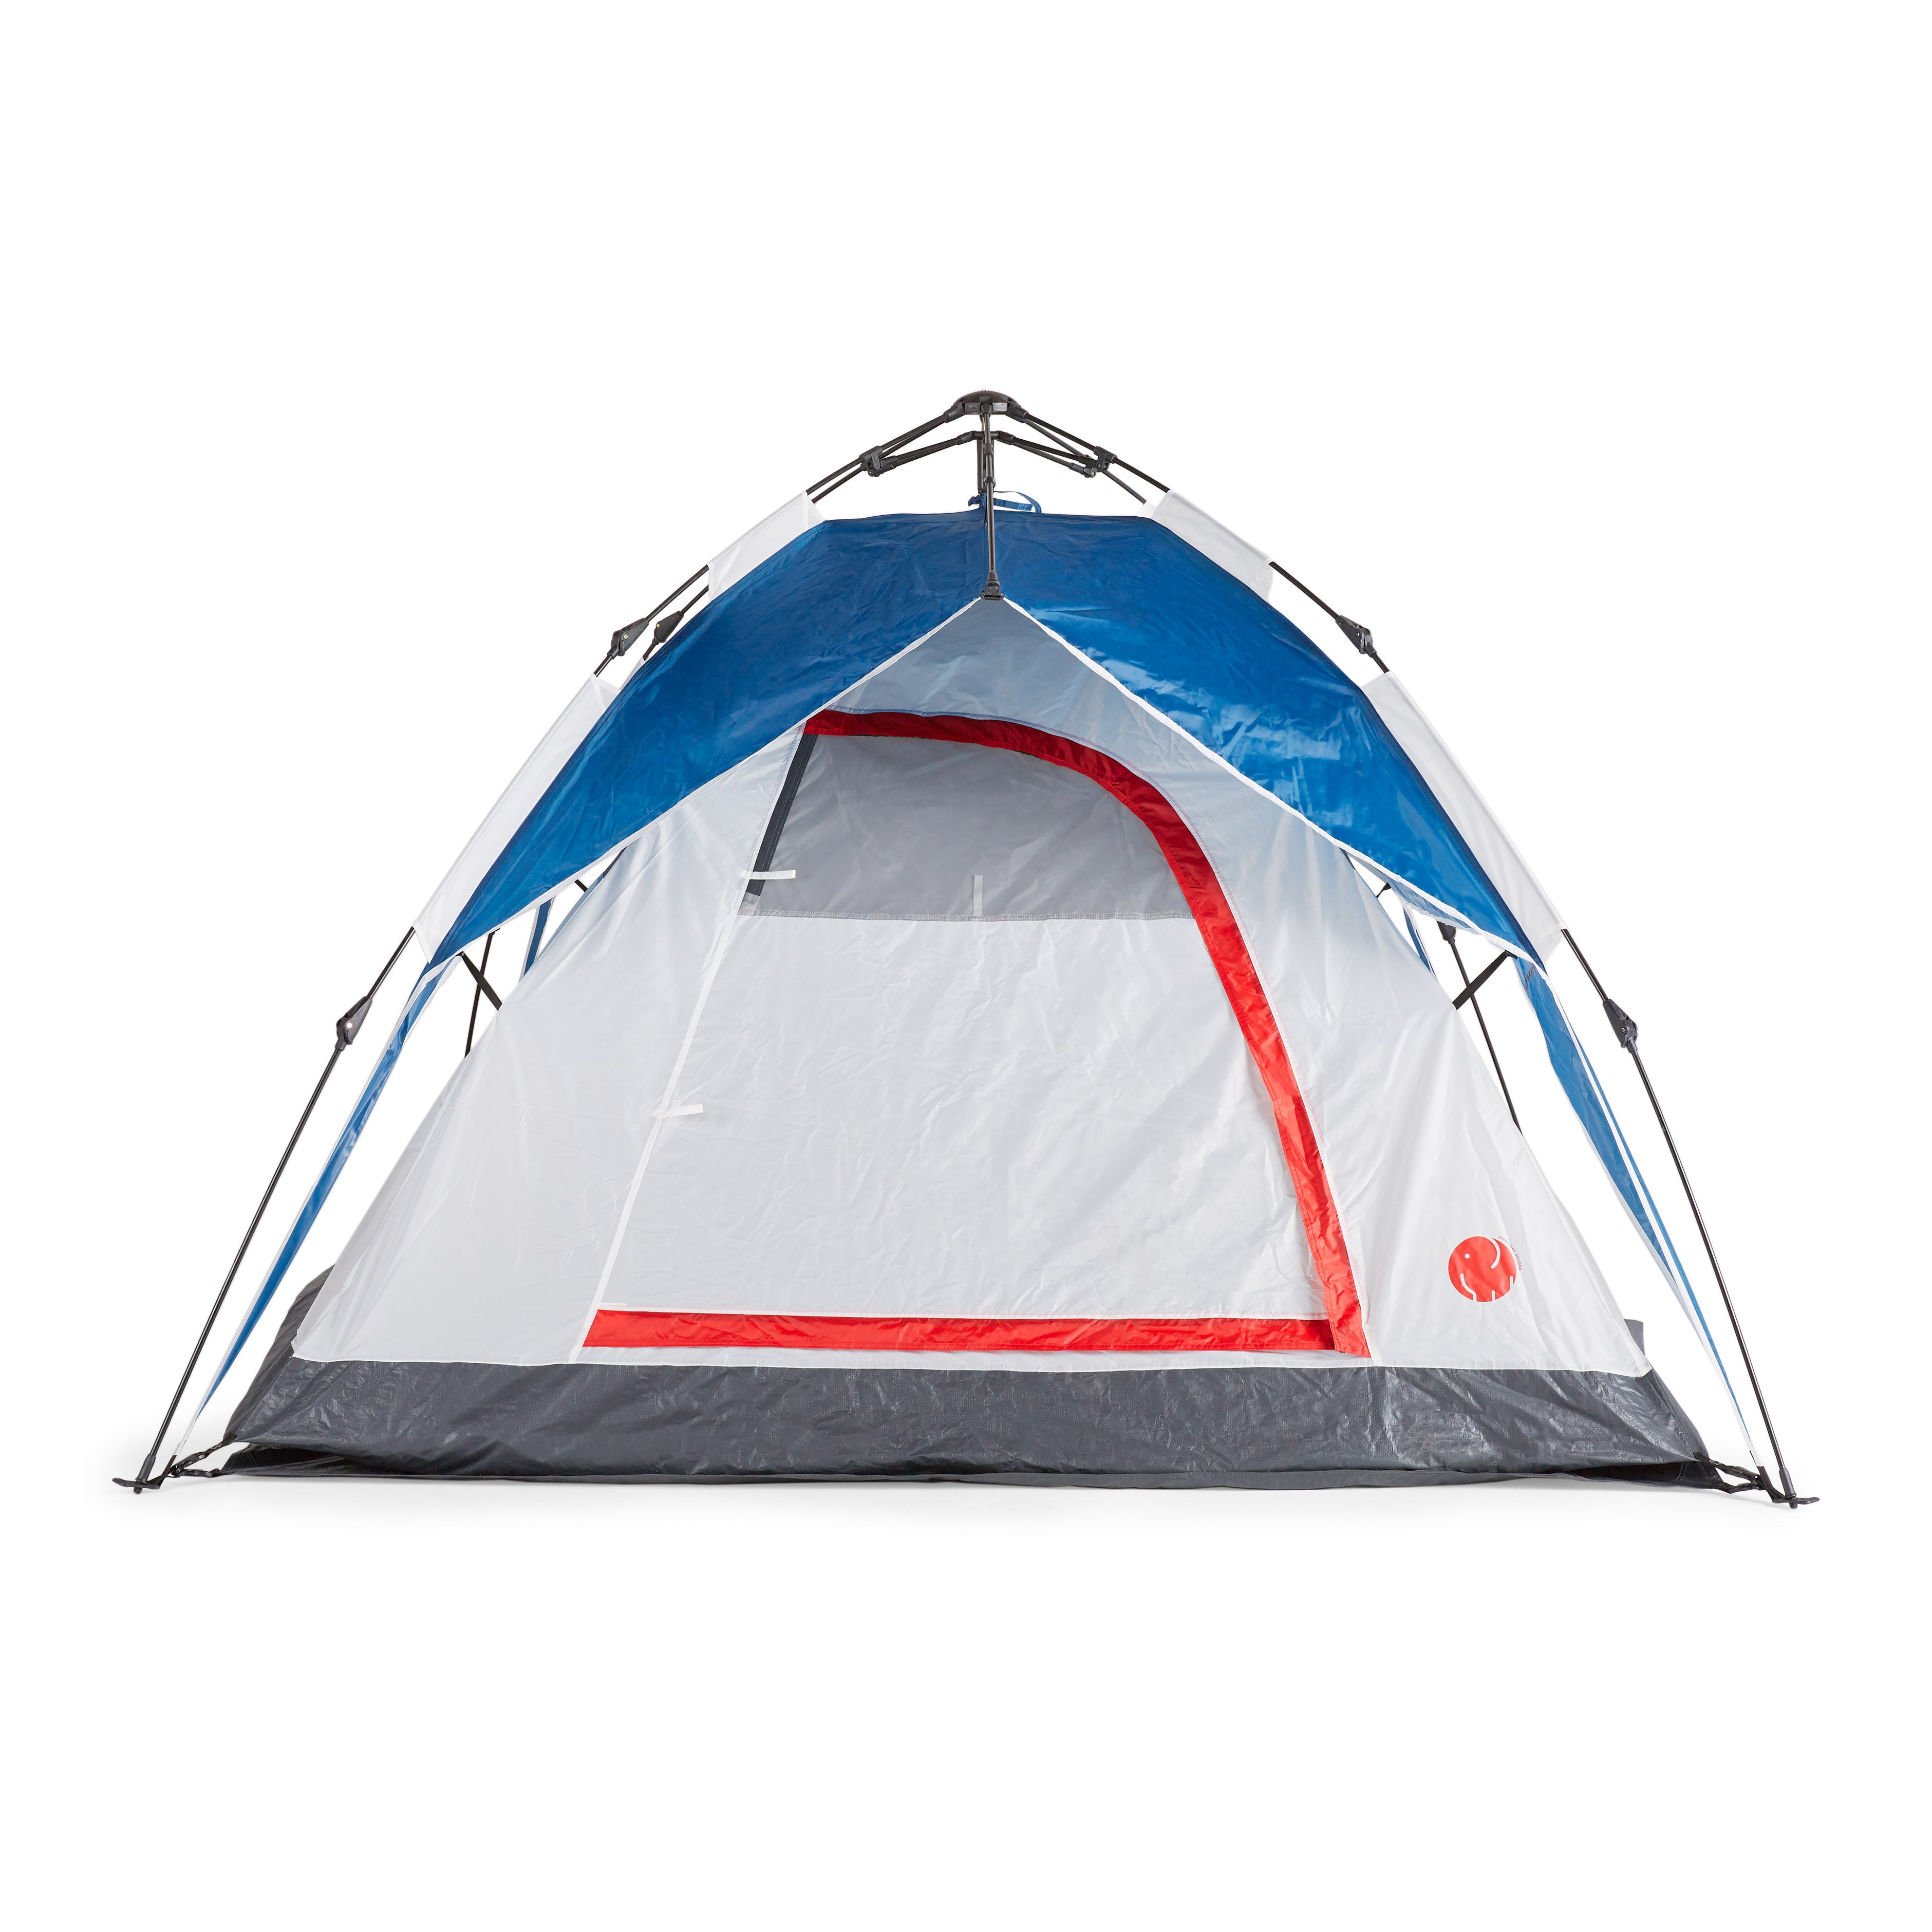 OMNICORE DESIGNS 3 Person Instant Dome Tent with Detachable Canopy - 7 OmniCoreDesigns